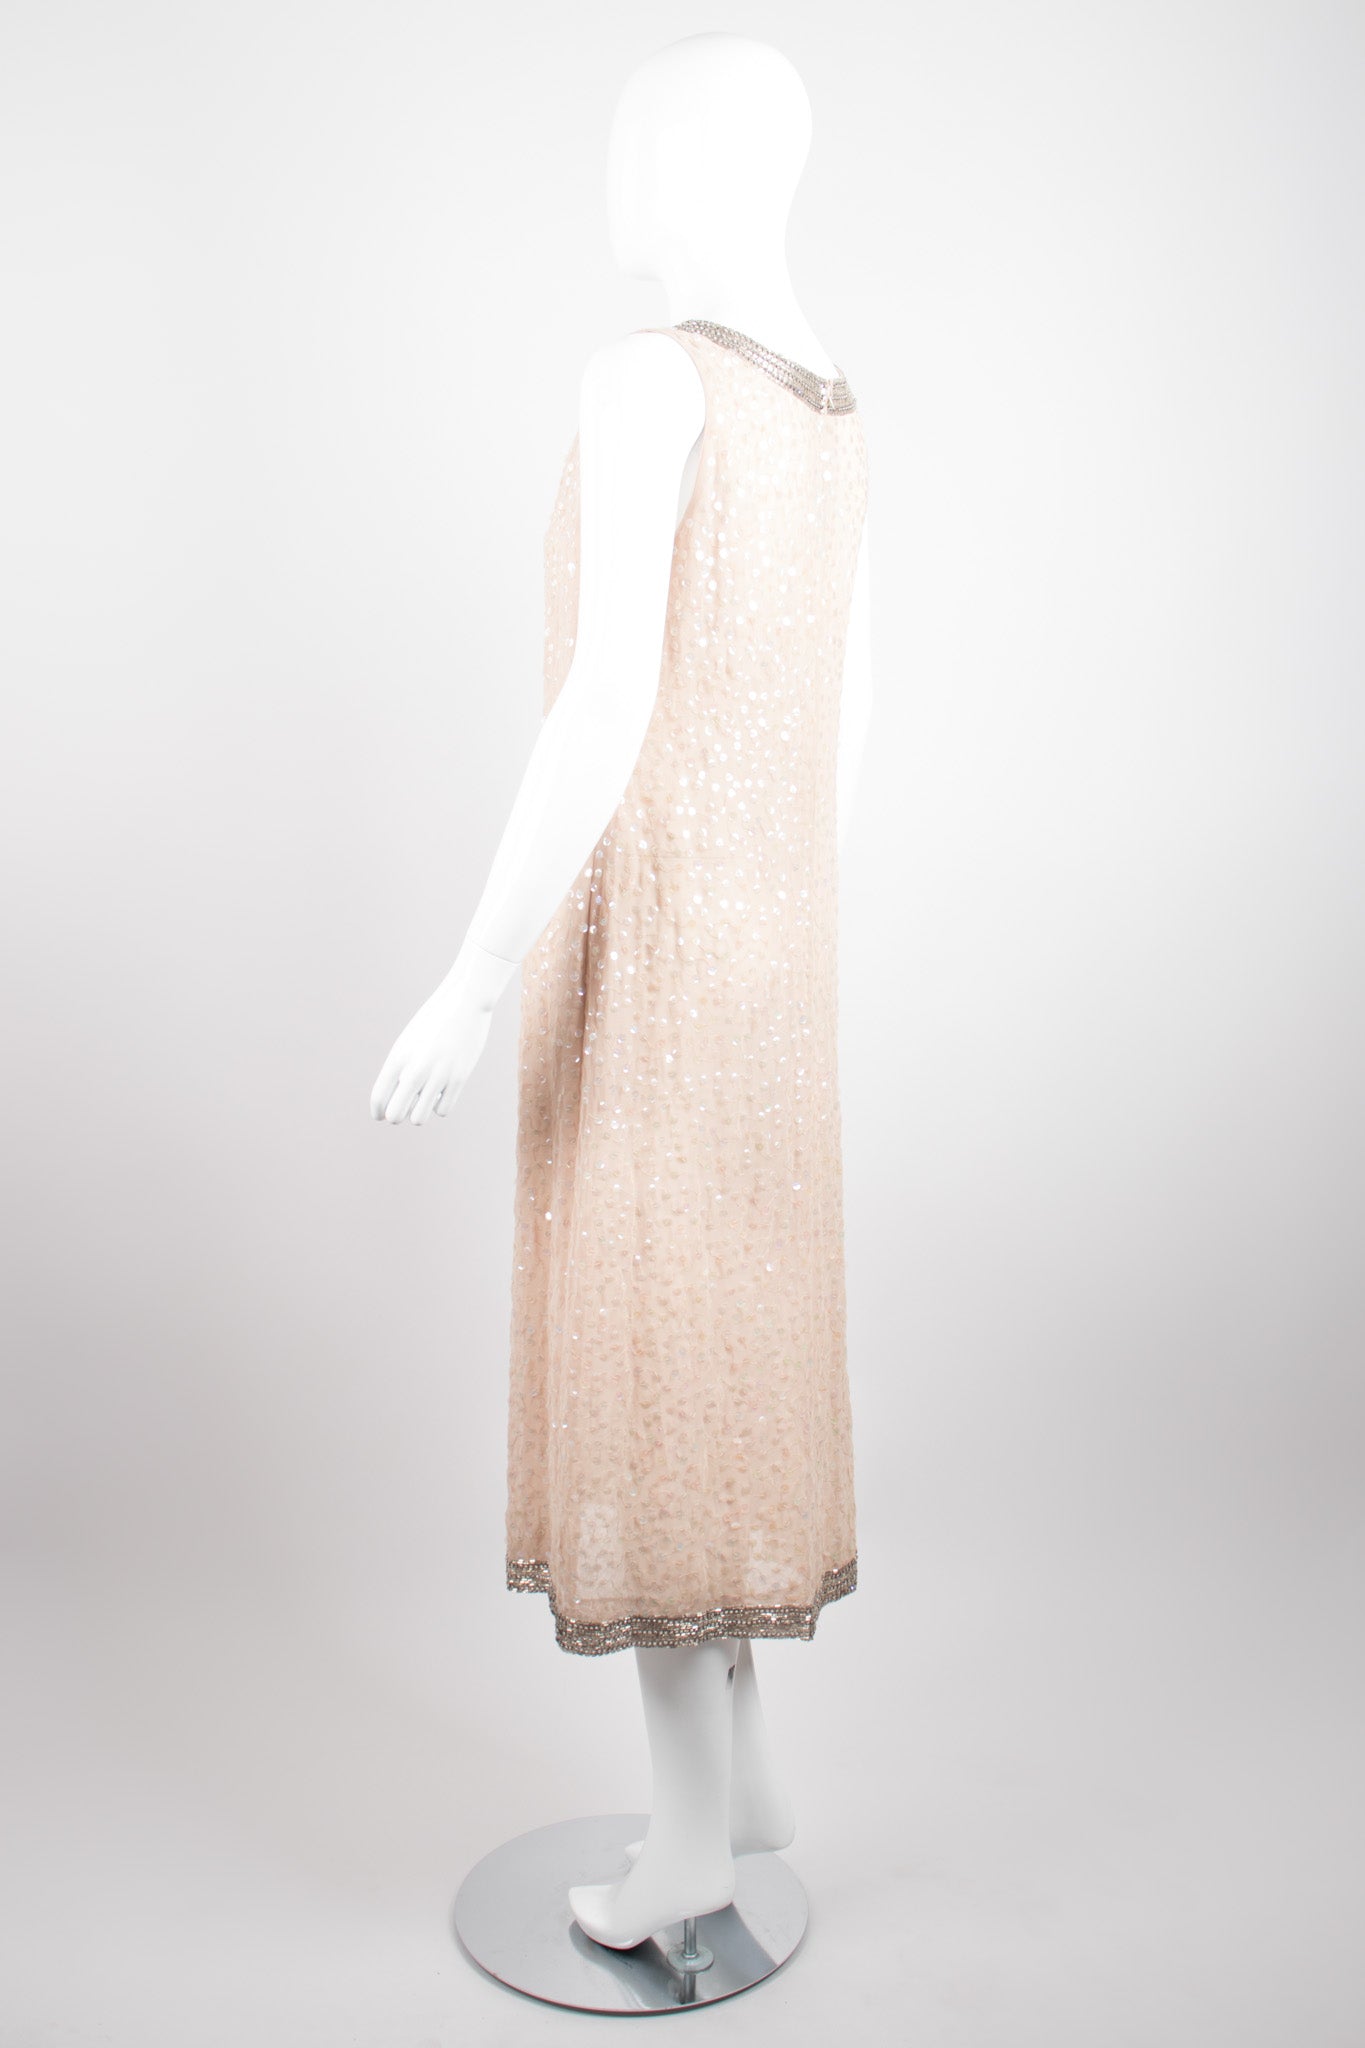 Mr. Blackwell Vintage Sheer Sequined Chiffon Nude Naked Dress